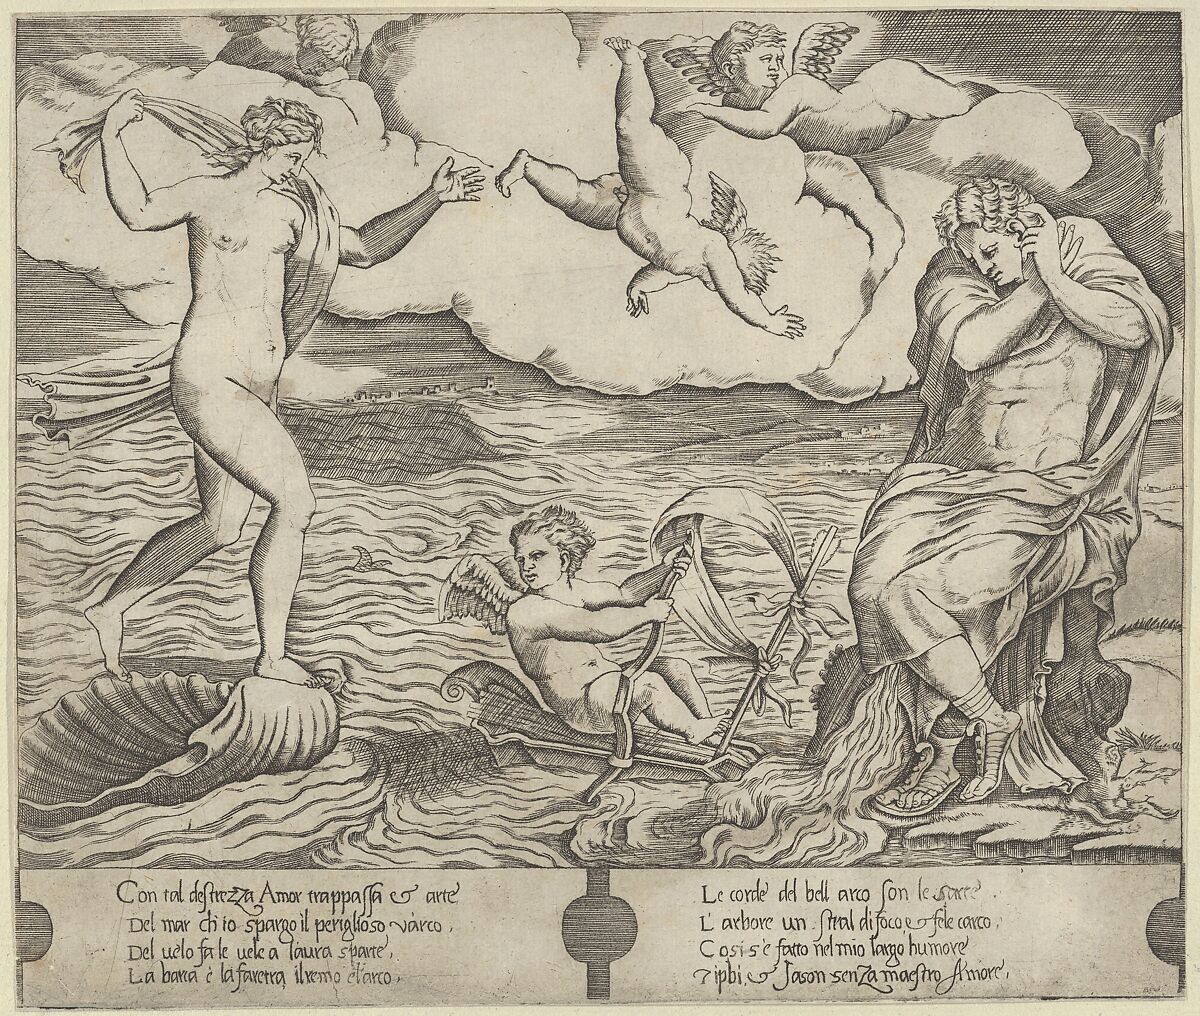 Venus riding a conch at left and cowering man (Jason) at right, Eros riding a makeshift boat holding a bow between them, Anonymous, 16th century, Engraving 